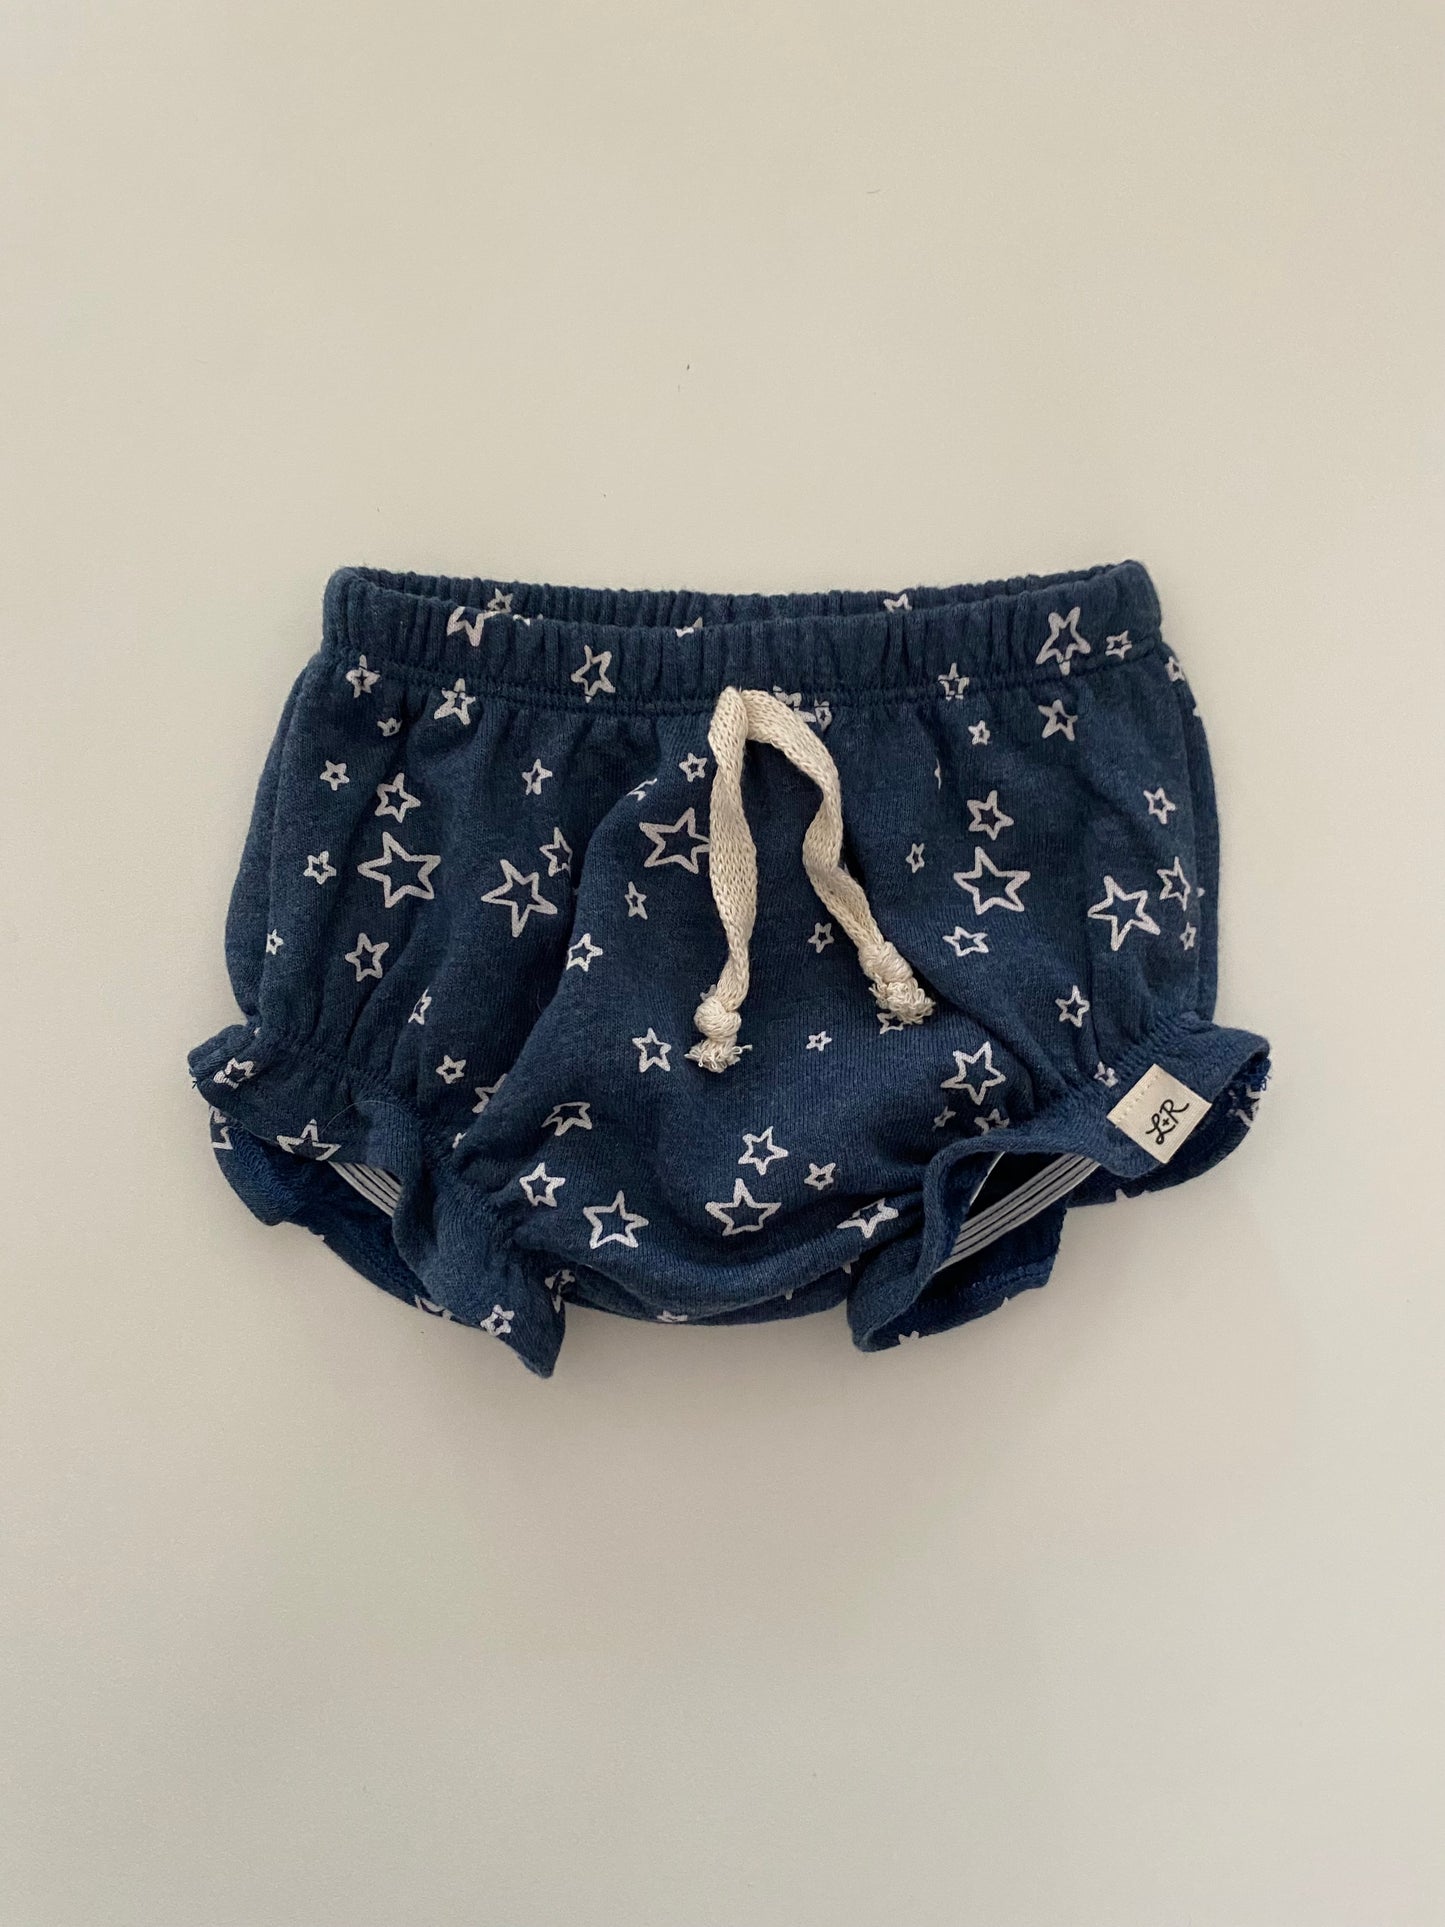 Lulu + Roo navy blue and star bubble shorts Girls 12-18M